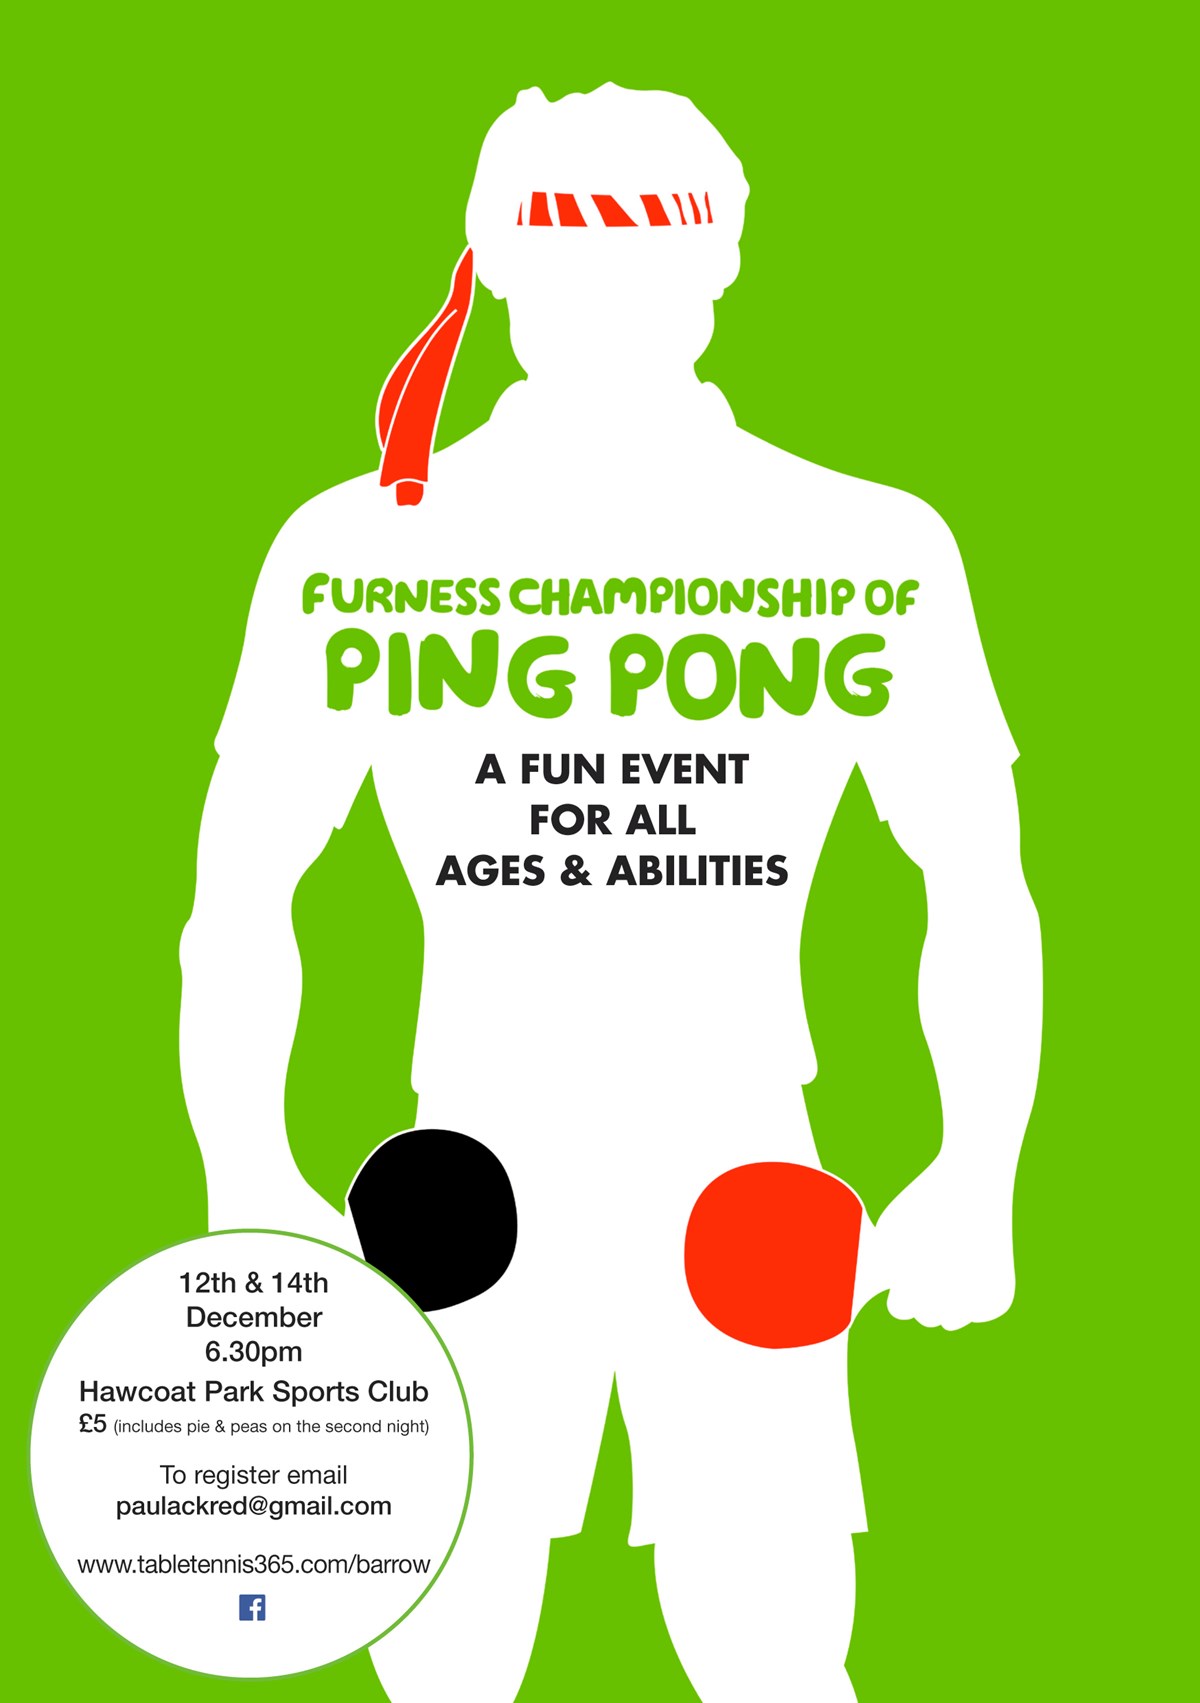 Ping Pong A5 Flyer Nov16 Lowres